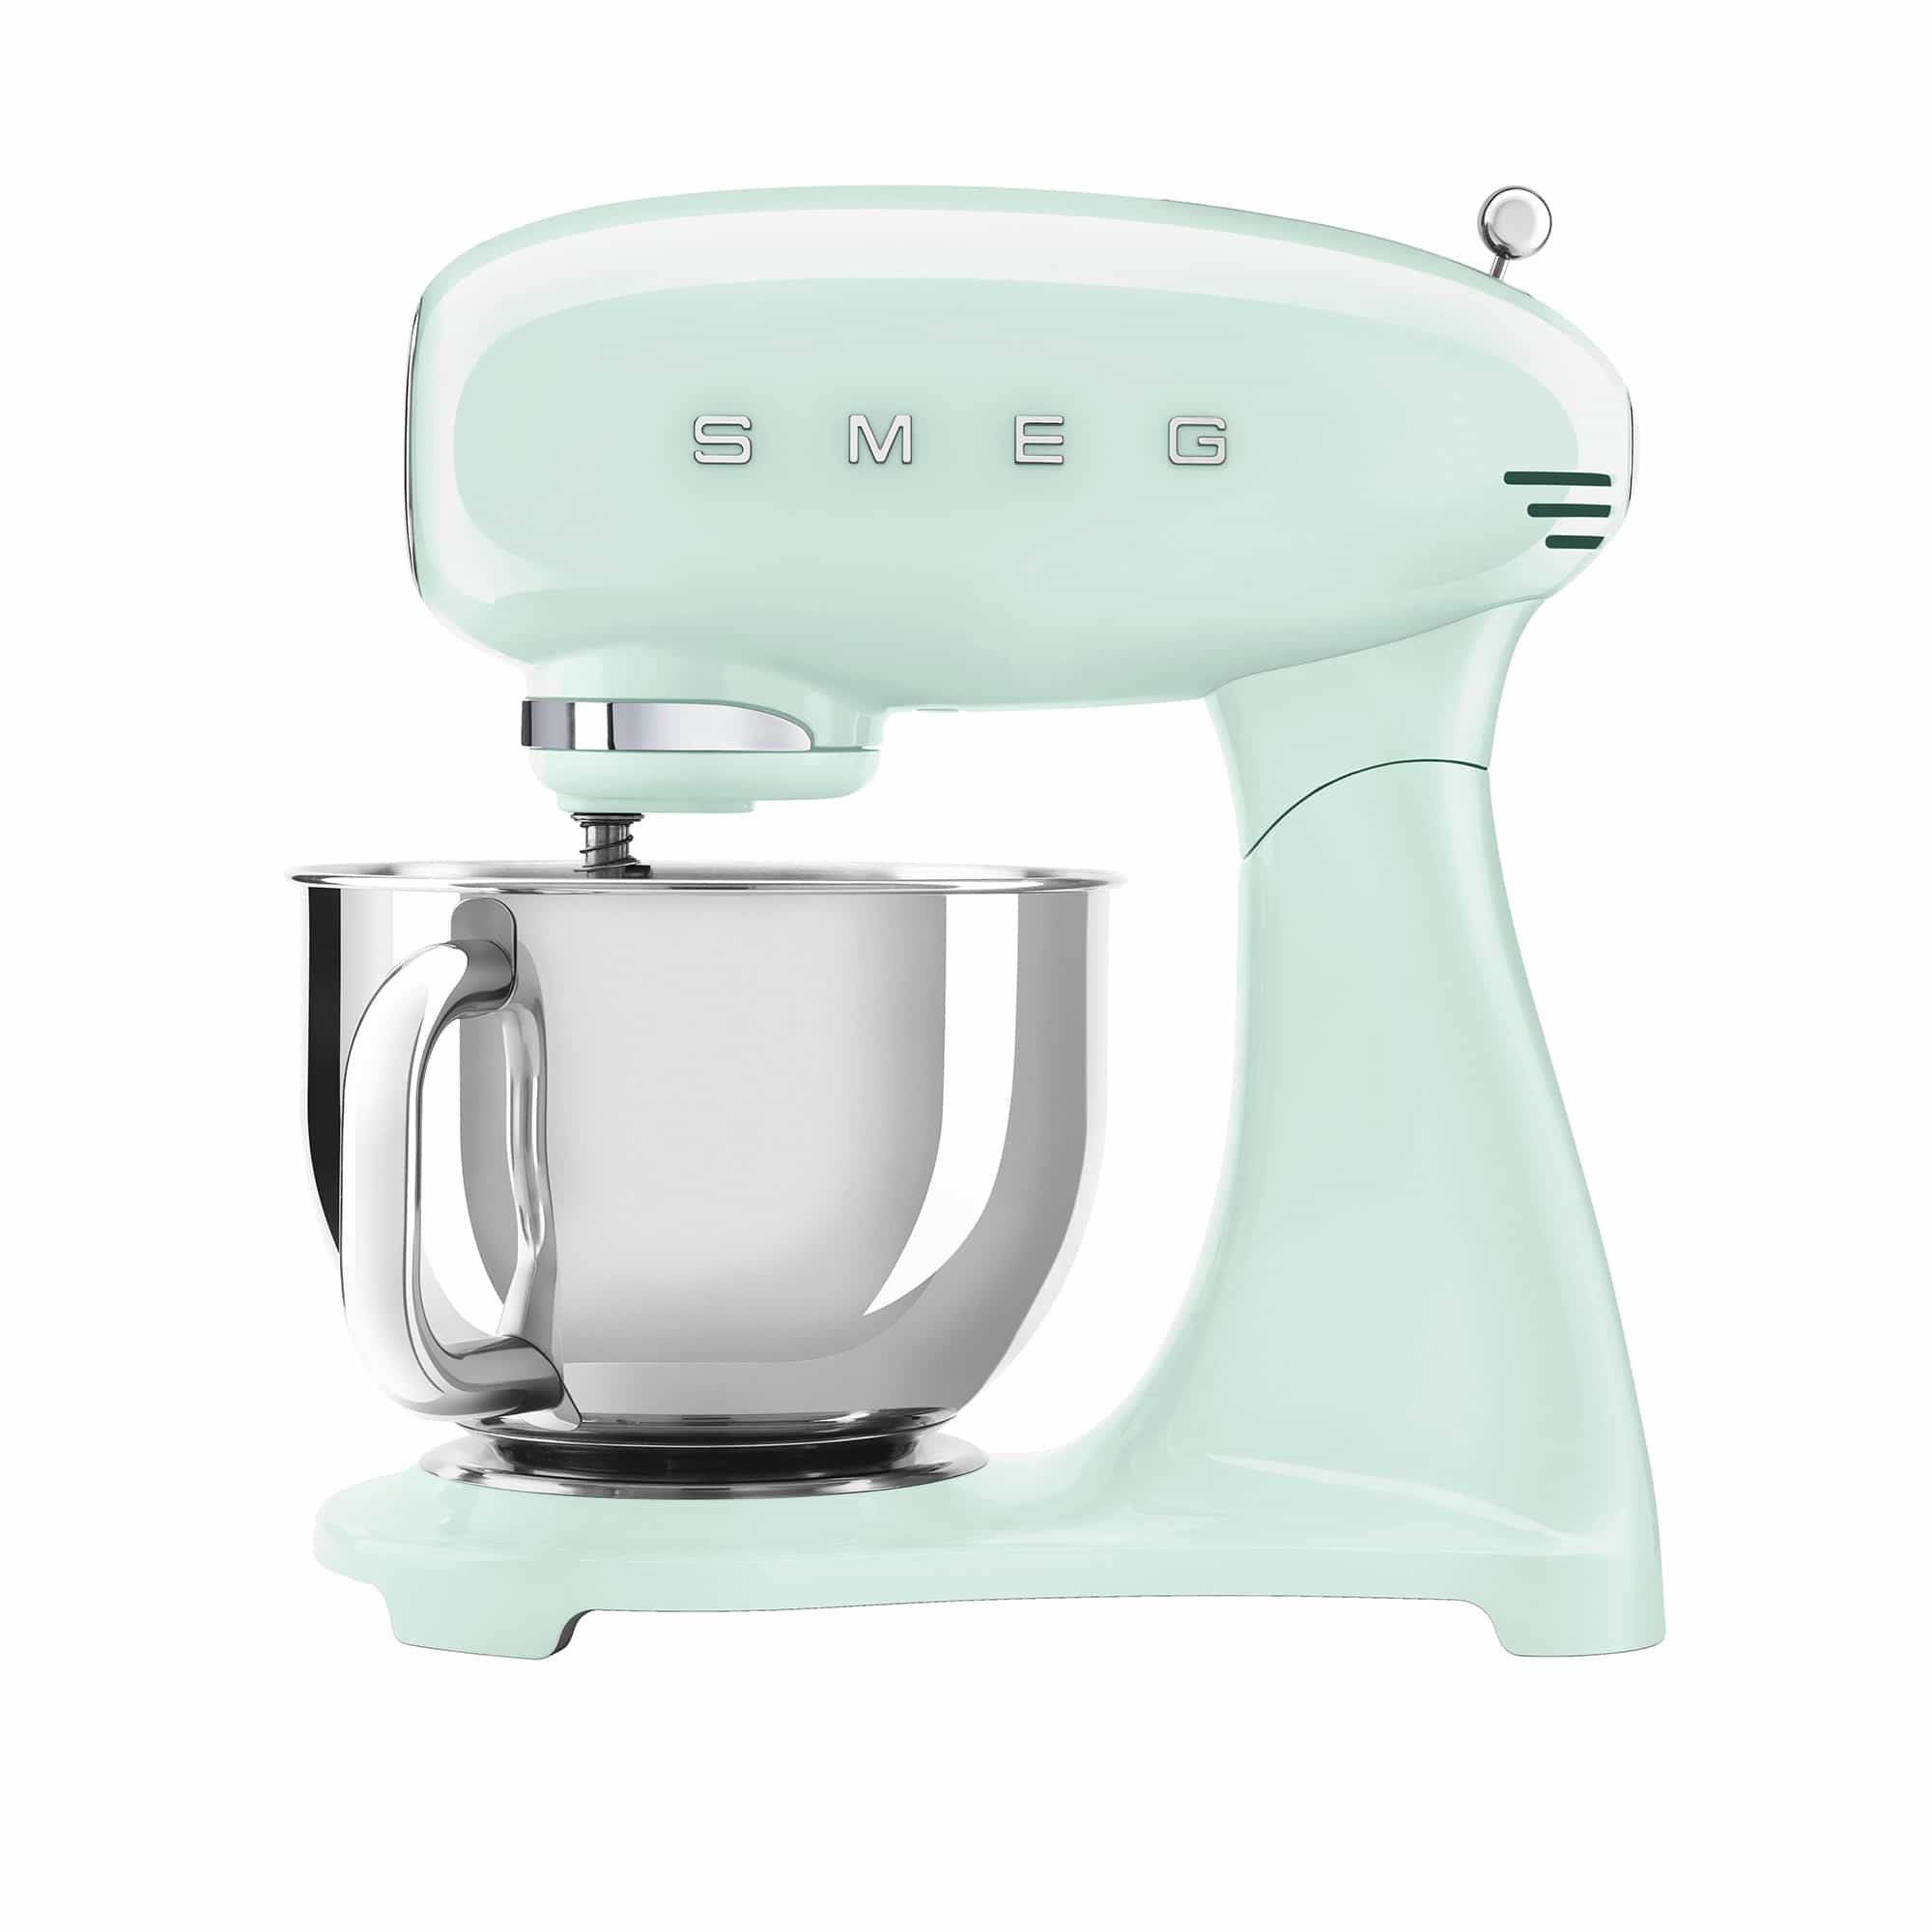 Smeg Stand Mixer Full Color Pastel Green